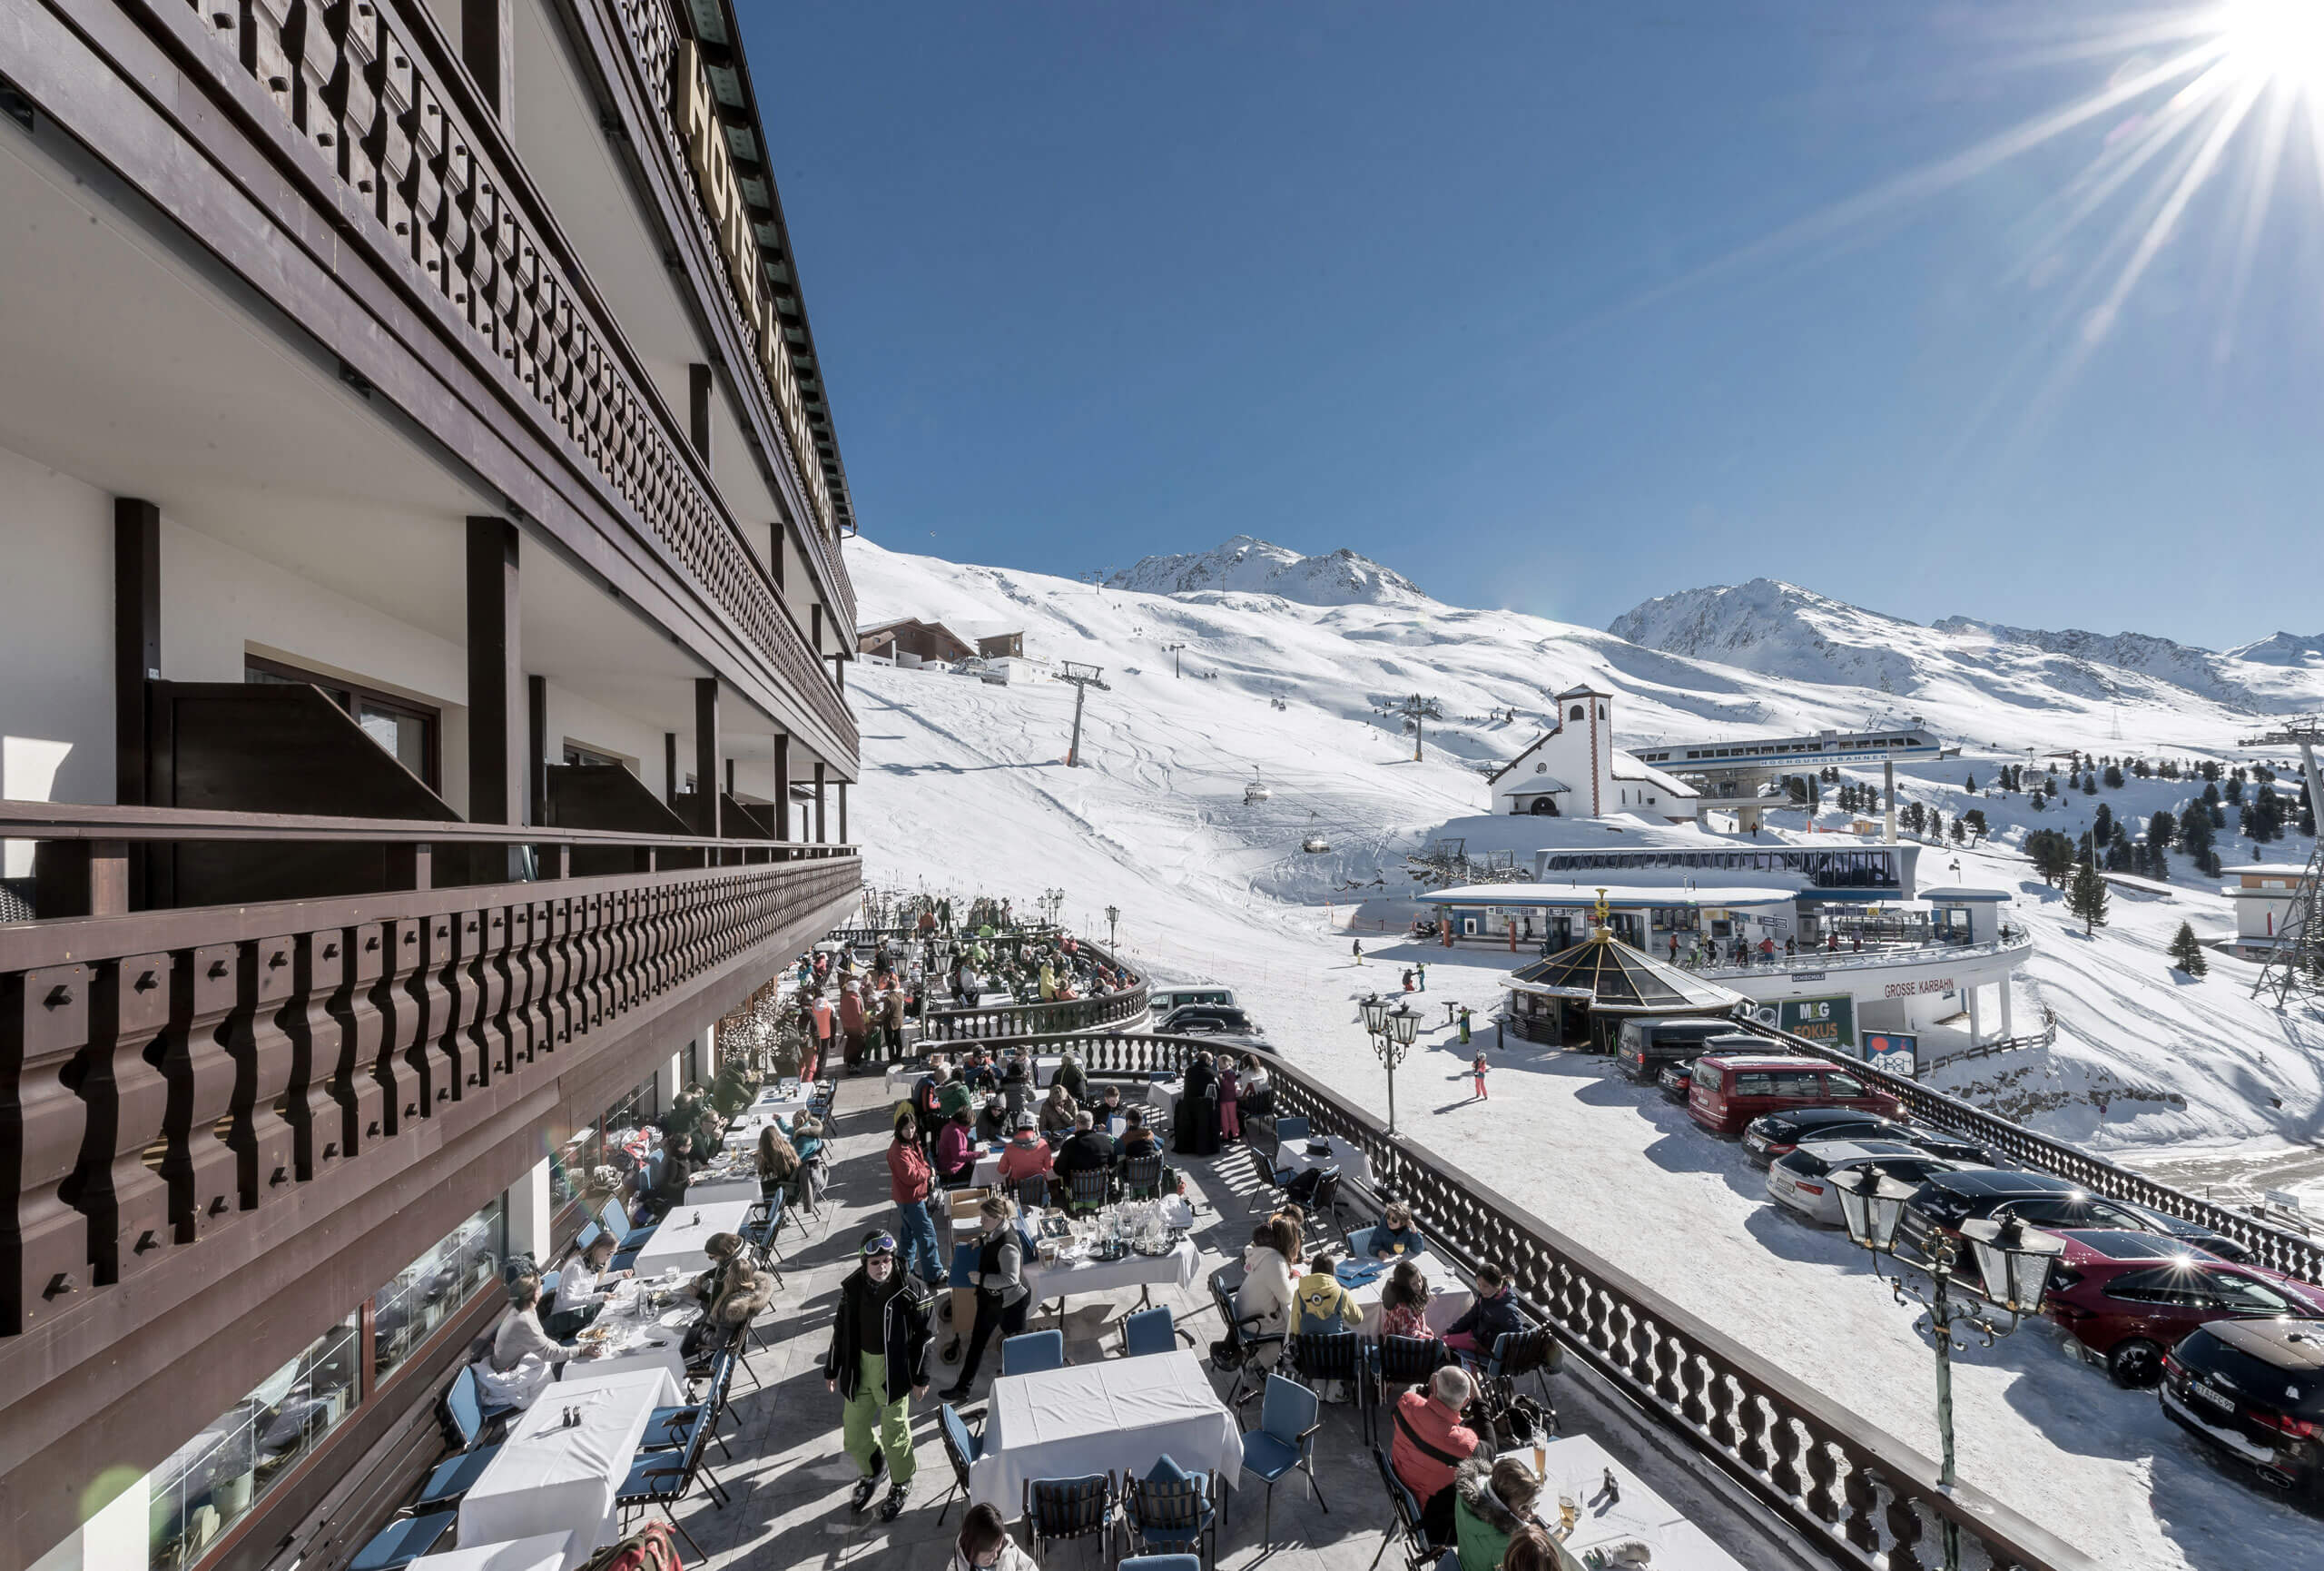 A group of people enjoying a ski holiday at the TOP Hotel Hochgurgl, located at 2,150 metres with sk